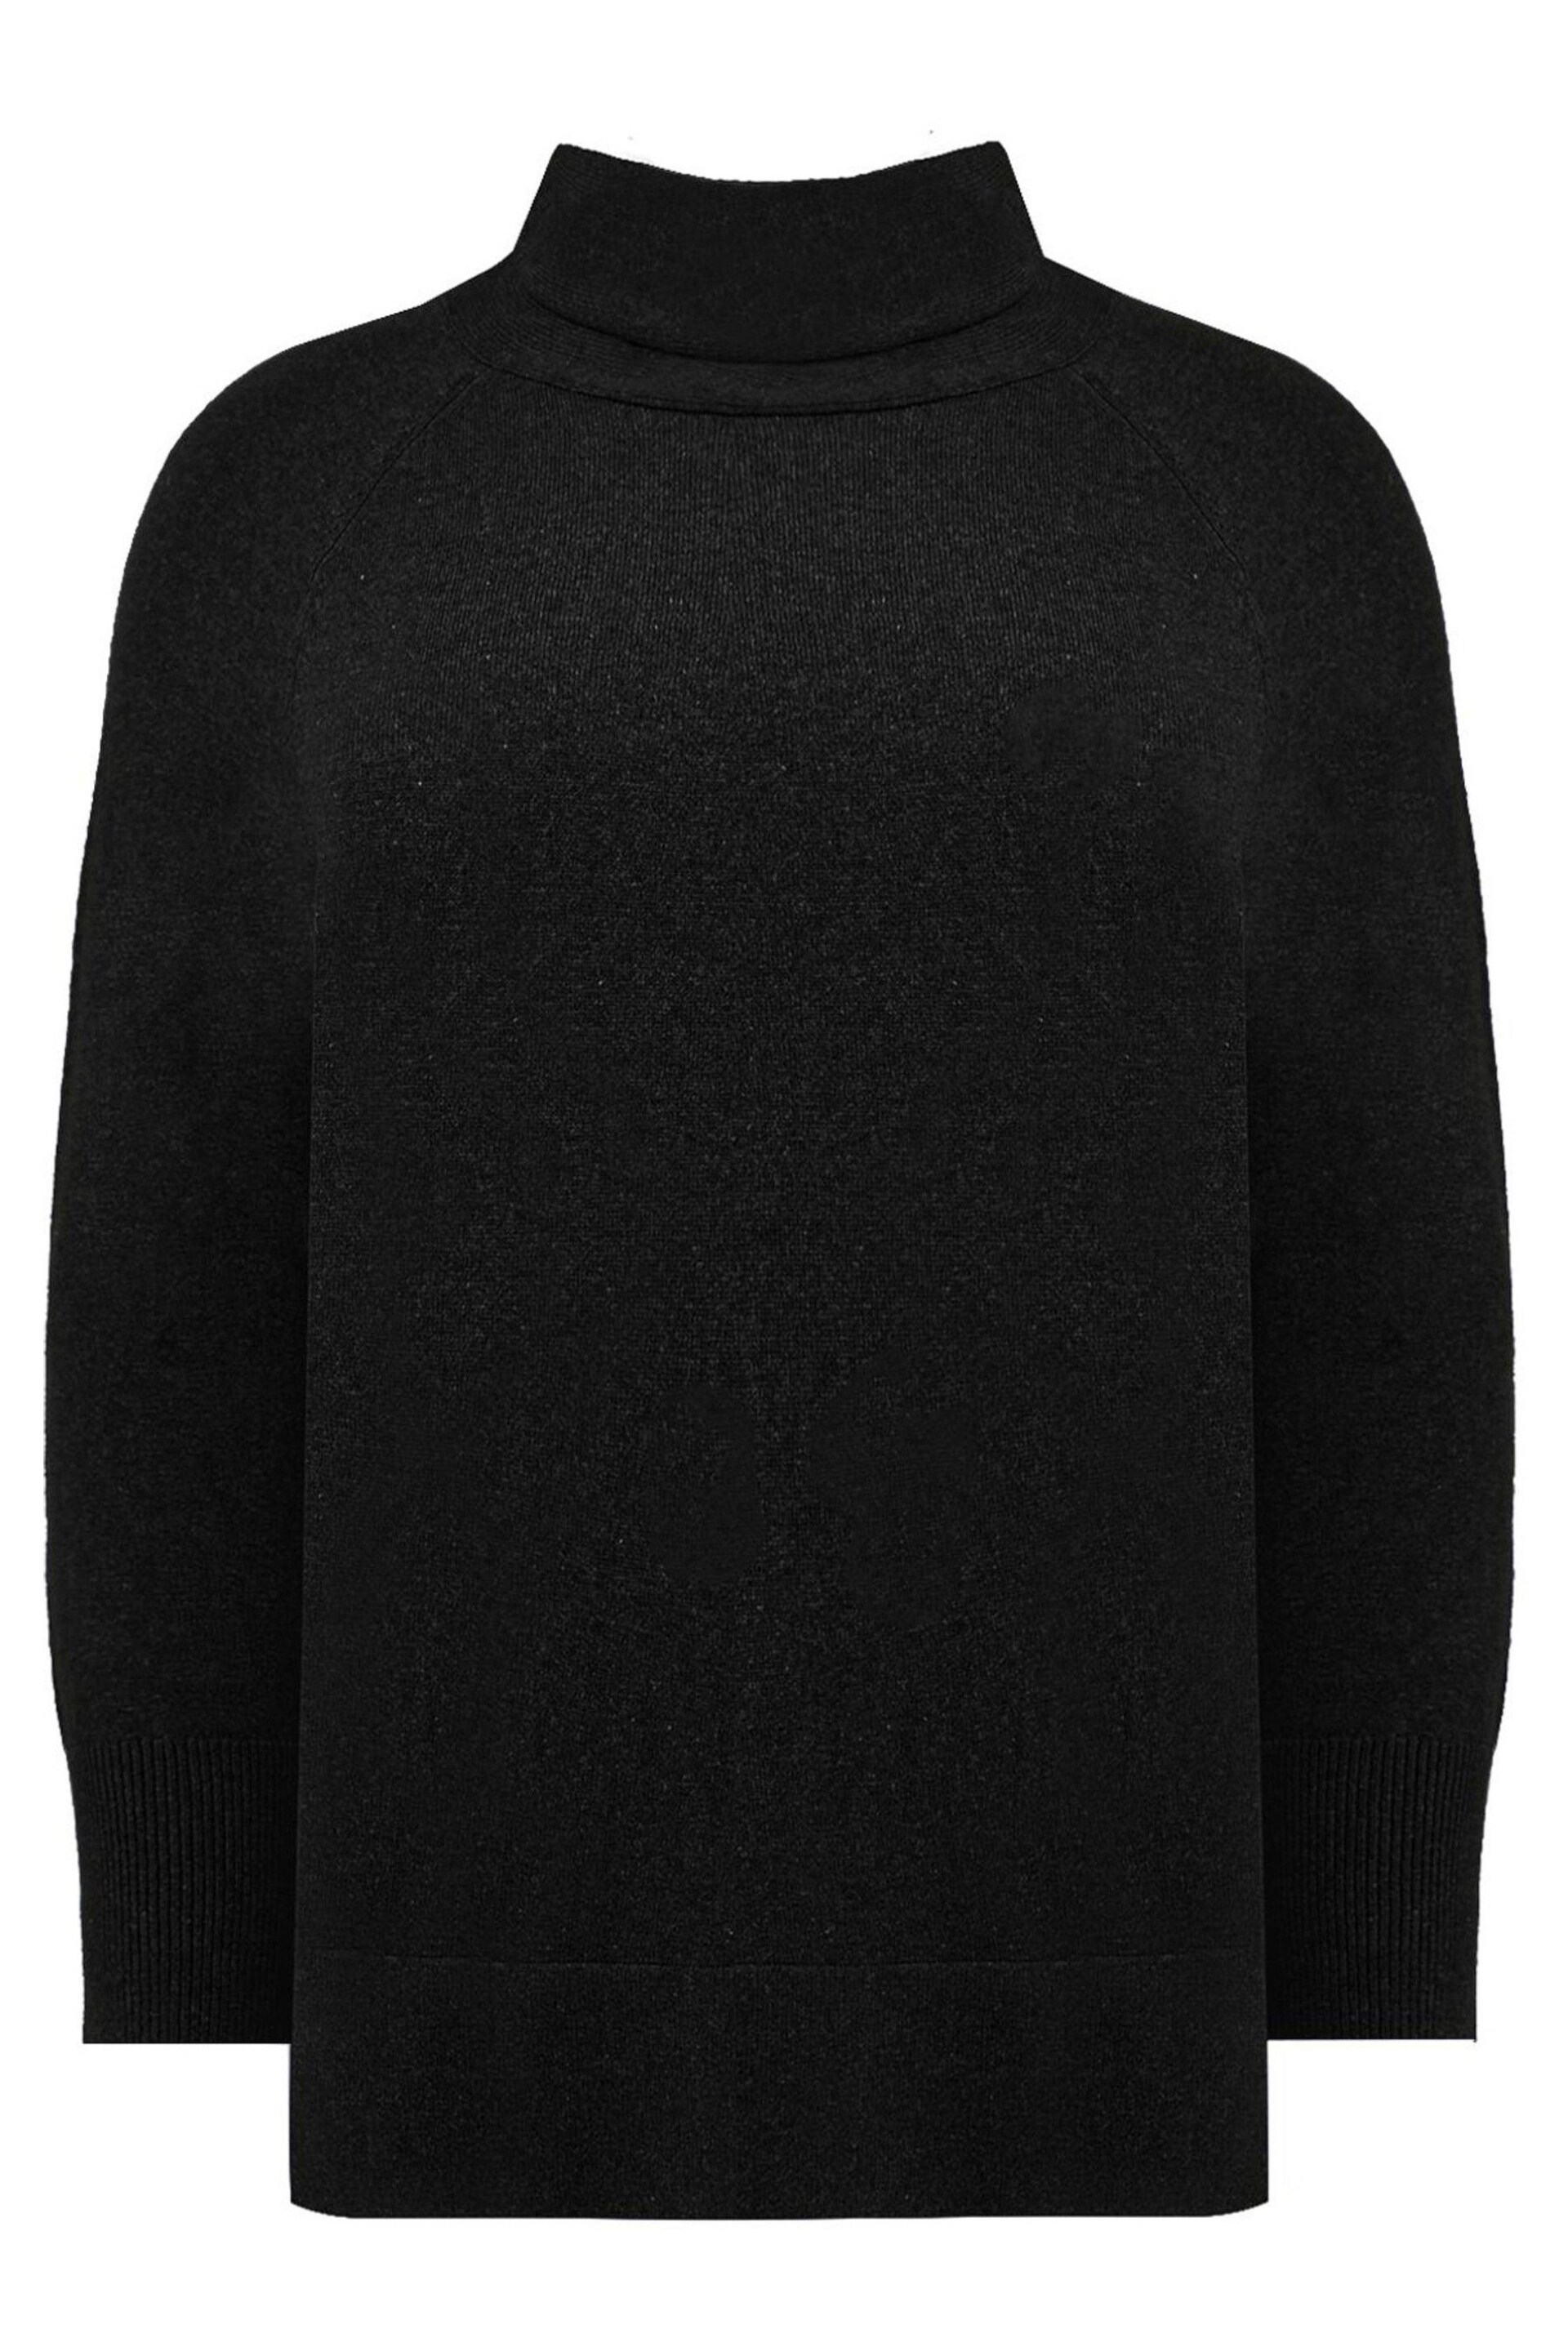 Live Unlimited Seam Detail Roll Neck Jumper - Image 5 of 5